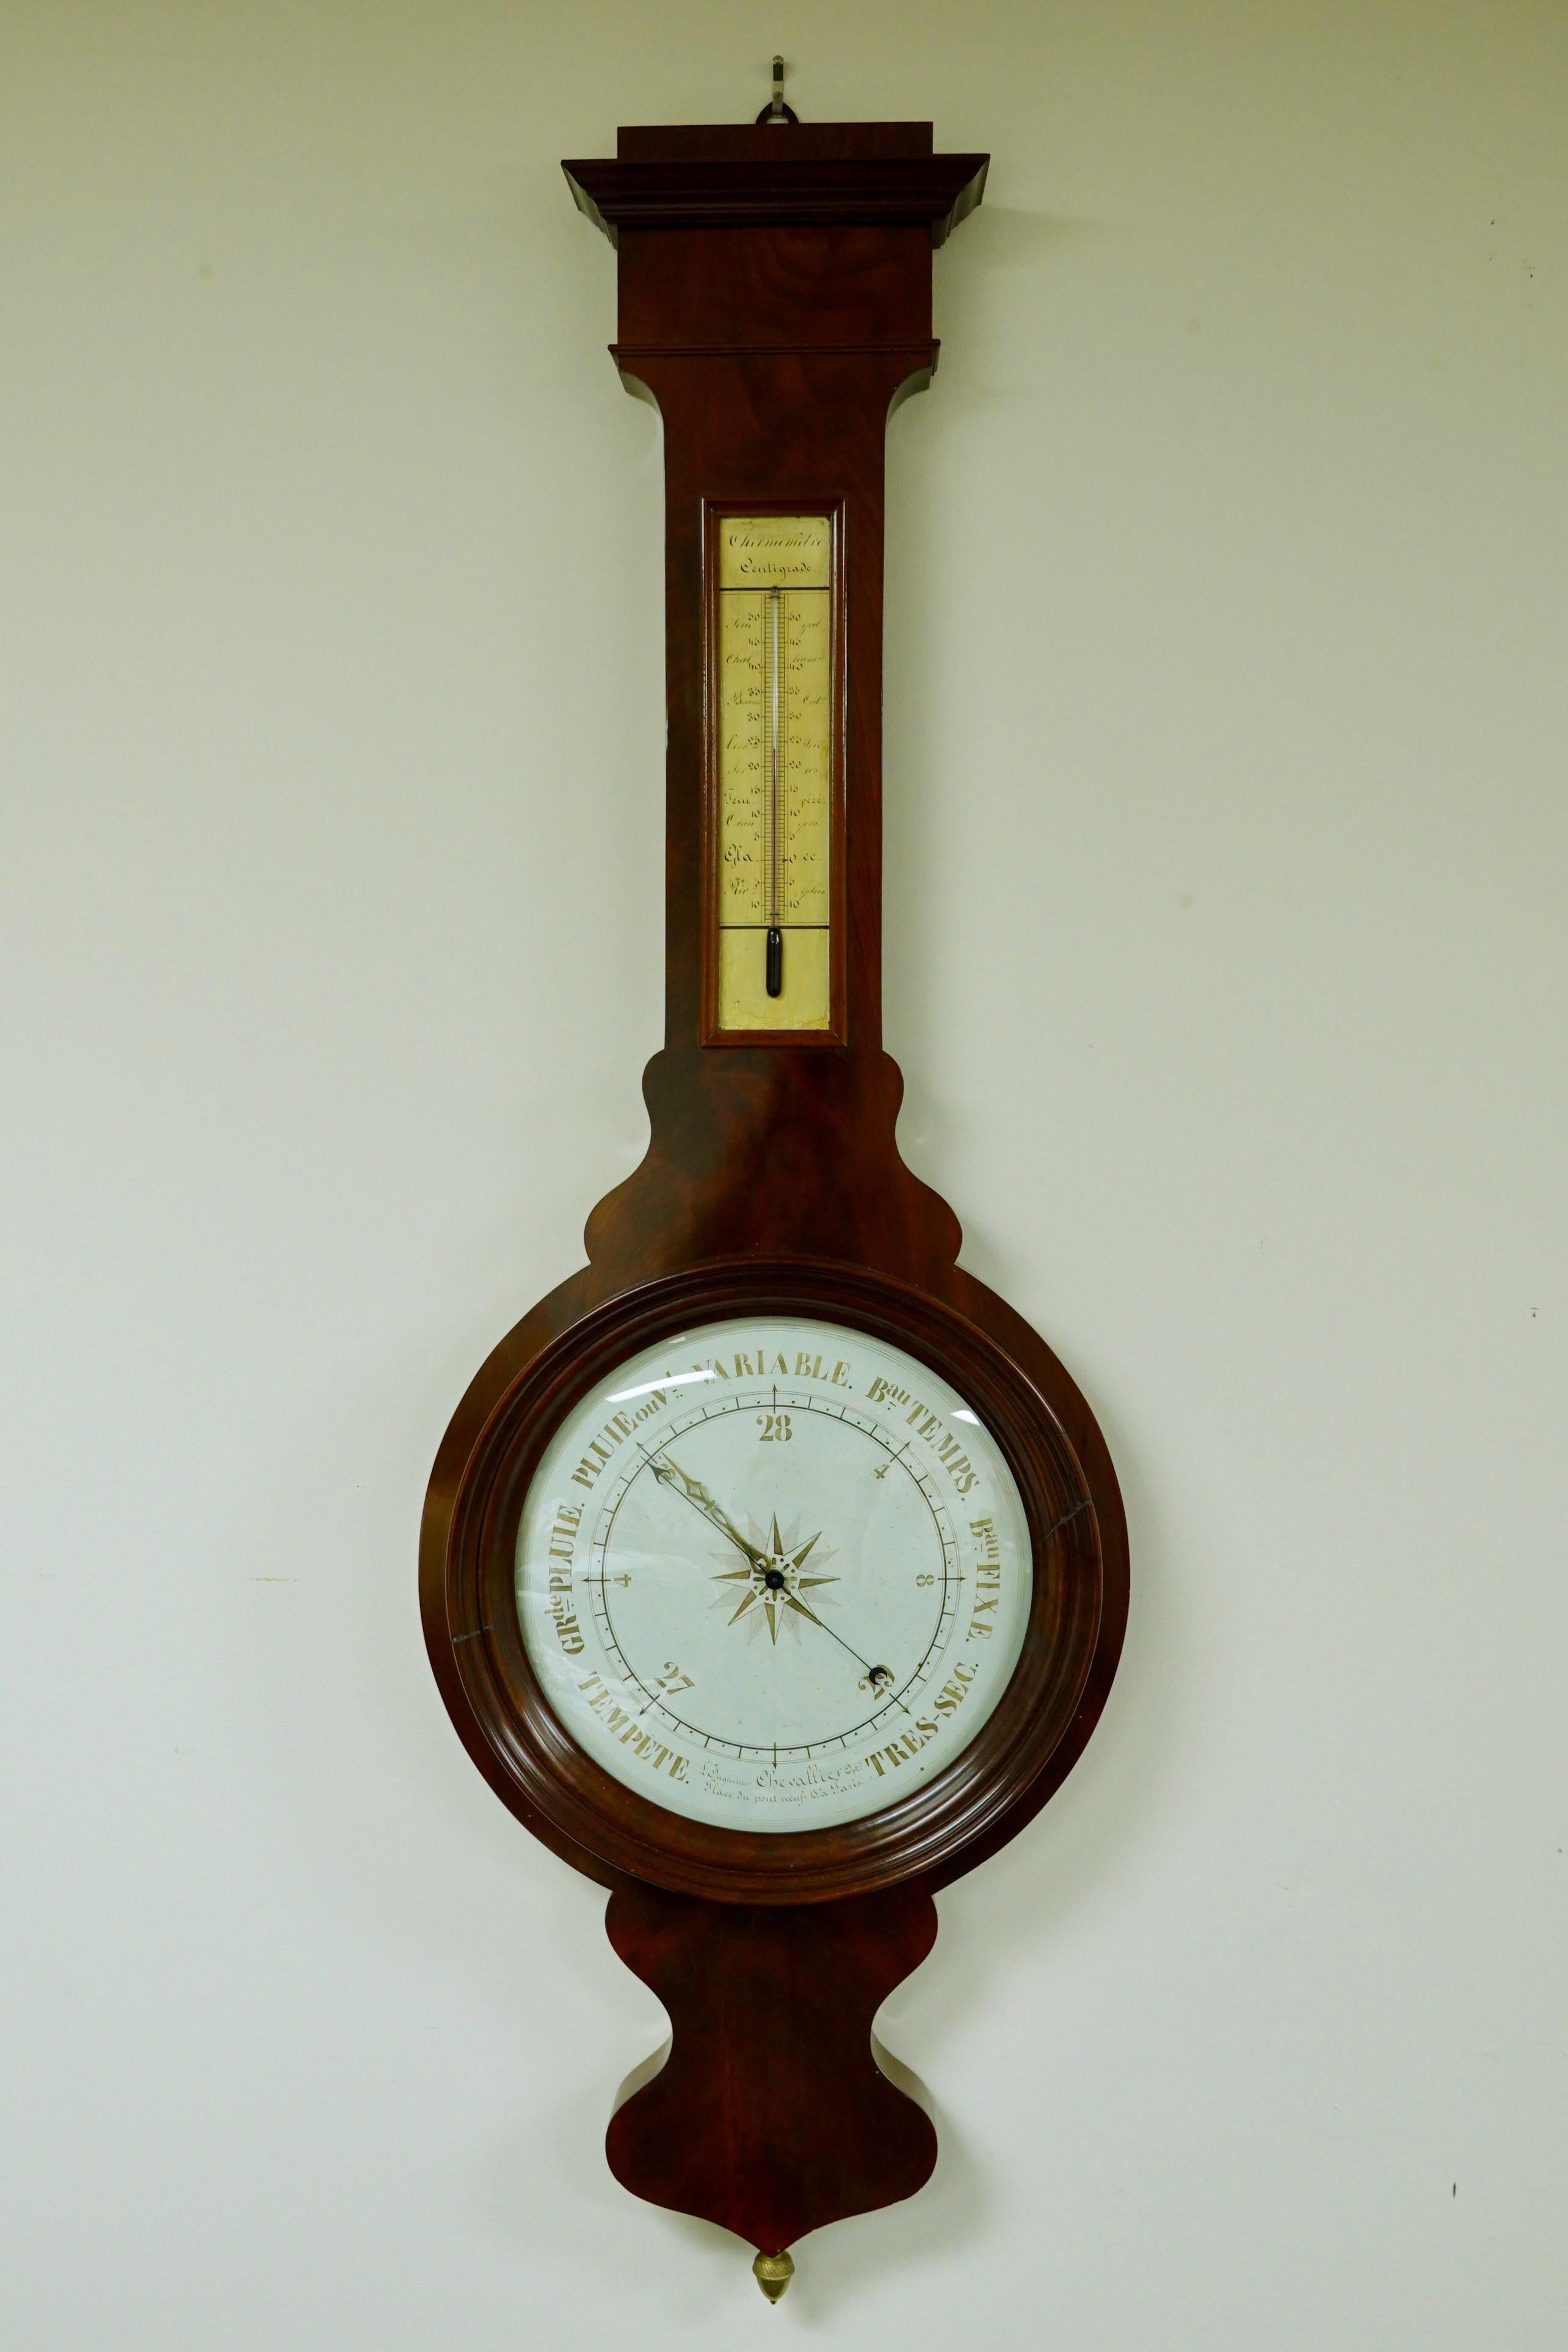 Impressive French mahogany barometer and thermometer from the Louis-Philippe period (Circa 1840), by Jean Gabriel Augustin Chevalliier. The barometer features an indicator arrow adjusted by an acorn finial at the bottom of the case. The dial is